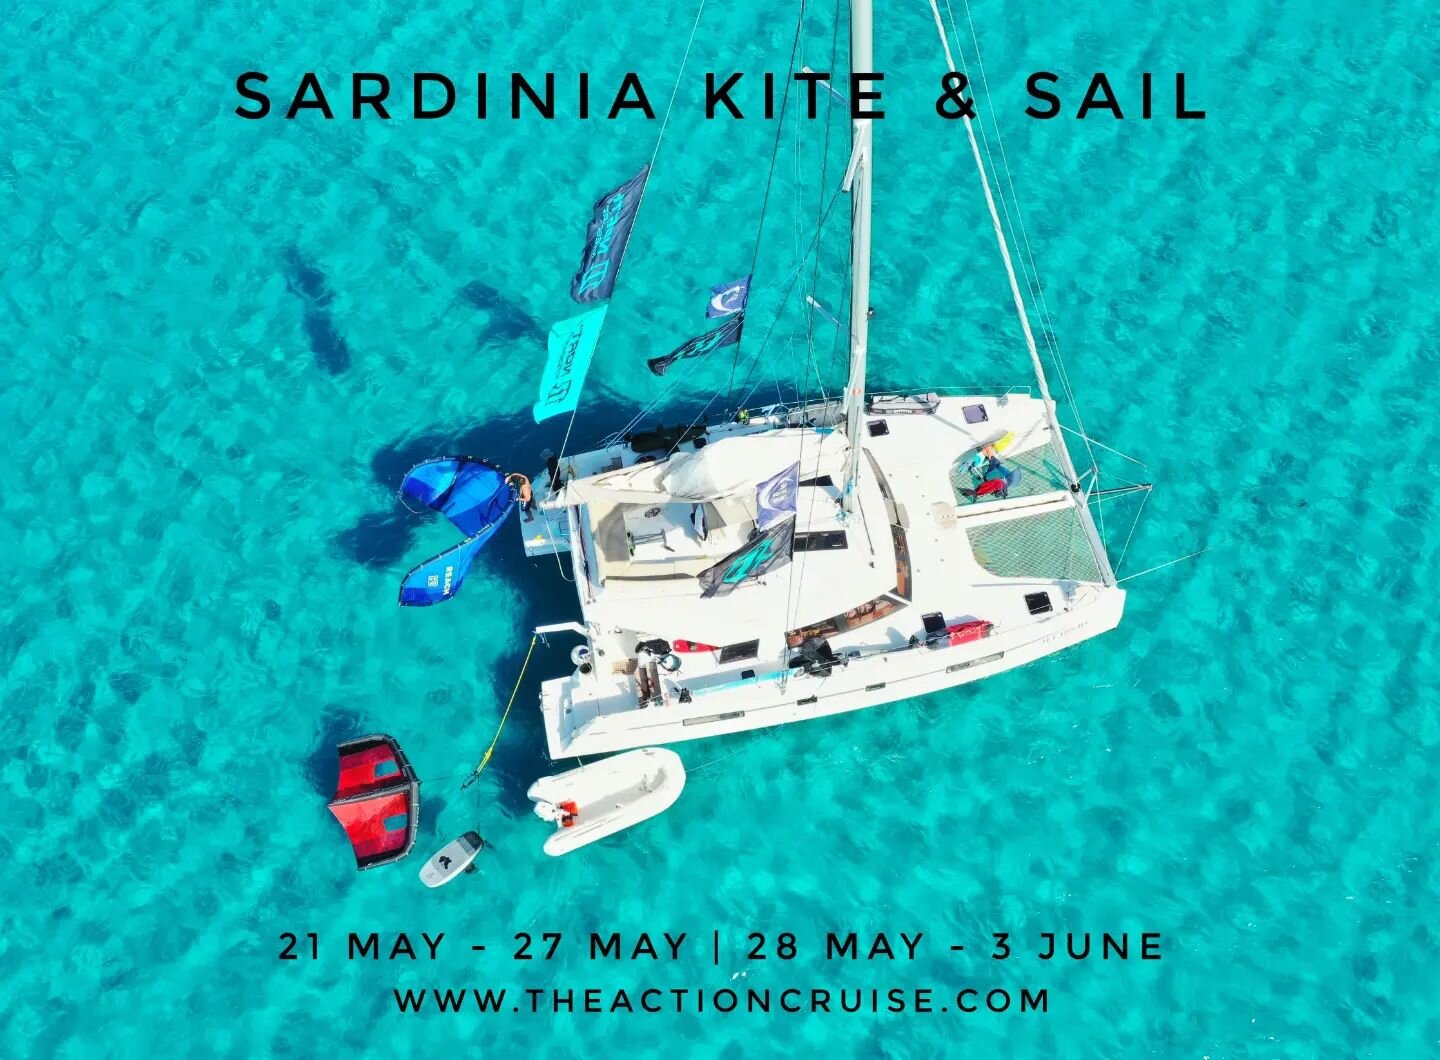 Kite &amp; Sail in Sardinia in May - June 🔝⛵️🇮🇹
The Strait of Bonifacio between North Sardinia and South Corse is the ideal location for a Kite &amp; Sail mission in early summer. Kite, Wing, Foil, Downwind and Coaching.
.
1) 14 MAY - 20 MAY | Ful